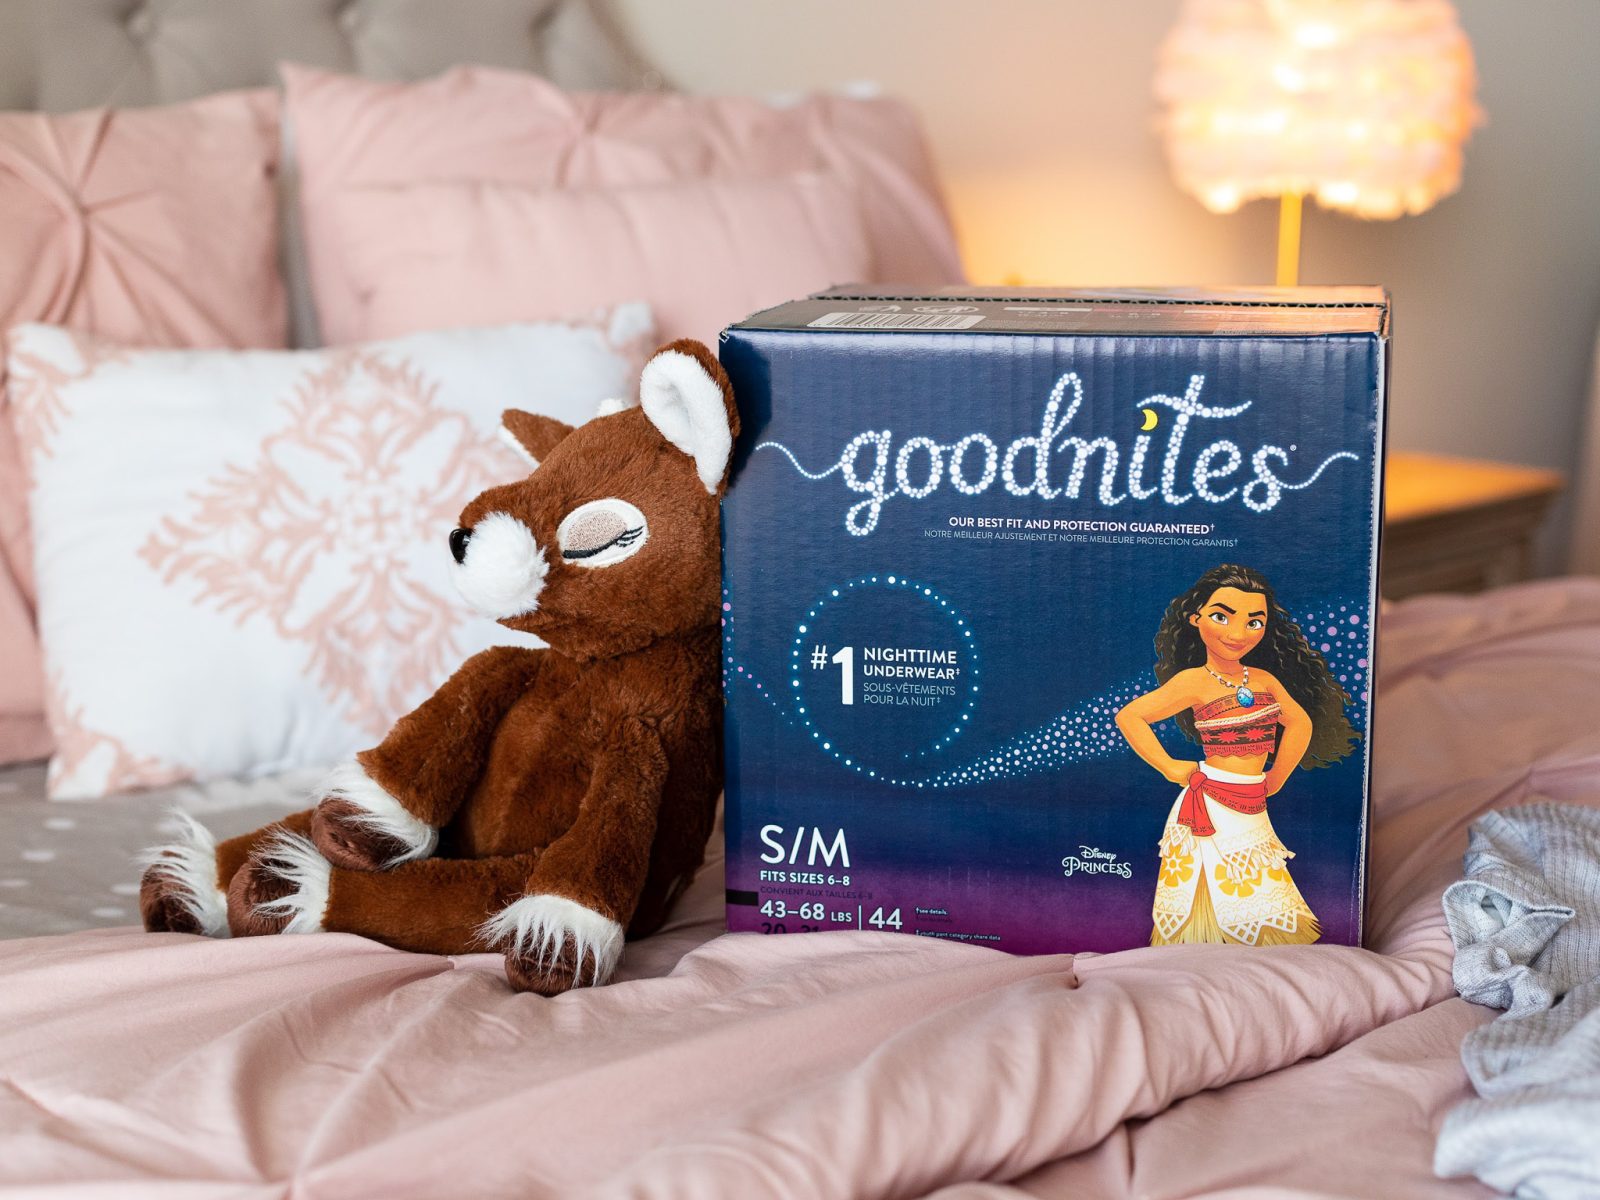 Huge Savings On Goodnites® At Publix – Save $5 With The Big Digital Coupon!